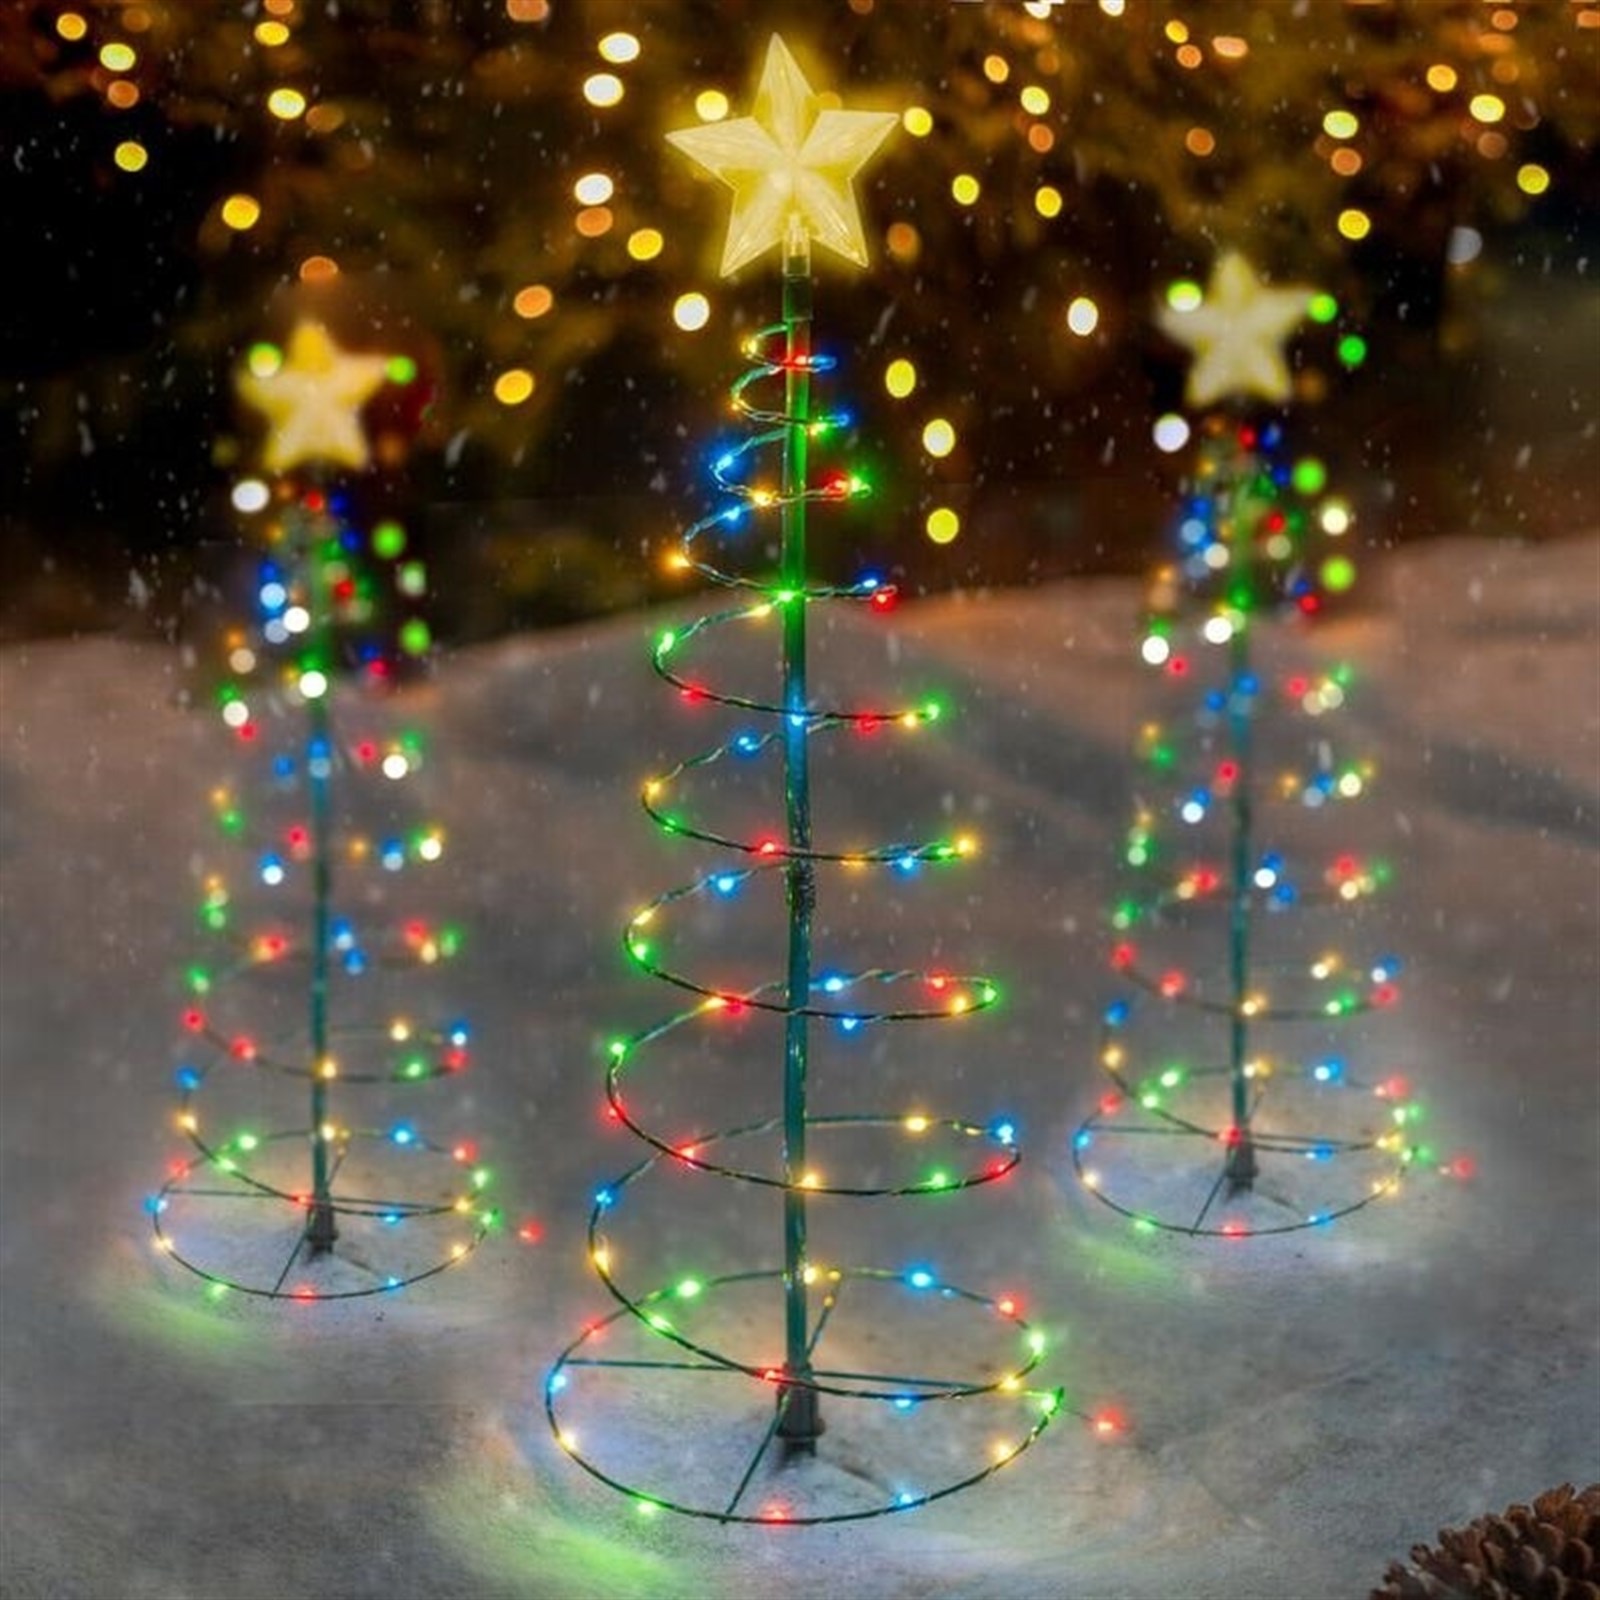 5 Creative Ways to Incorporate Solar Lights into Your Christmas Decorations